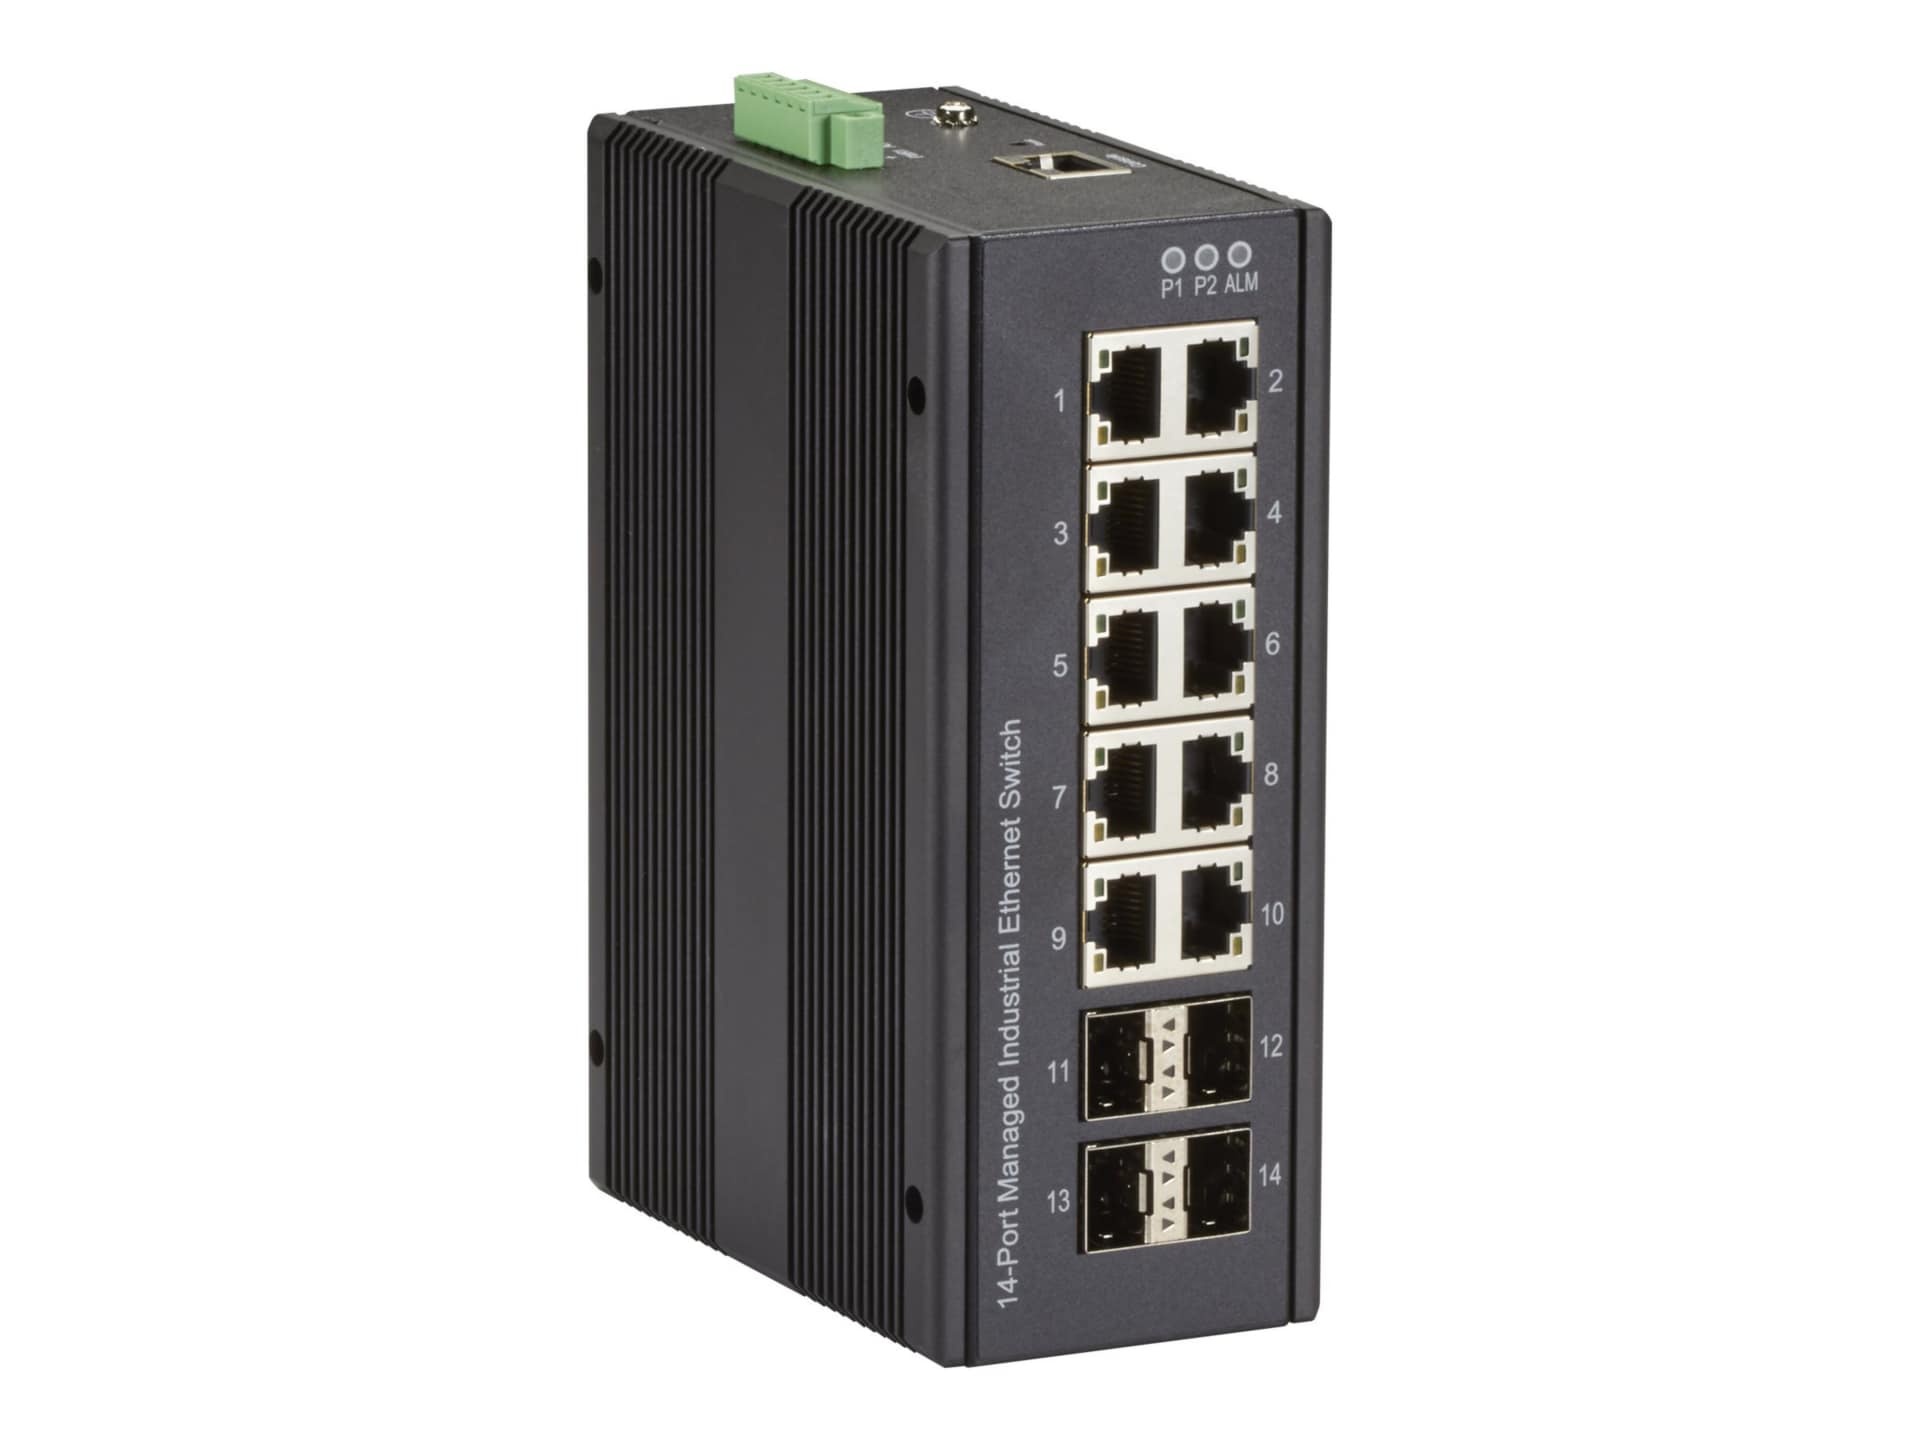 Black Box Industrial Managed Ethernet Switch - switch - 14 ports - managed